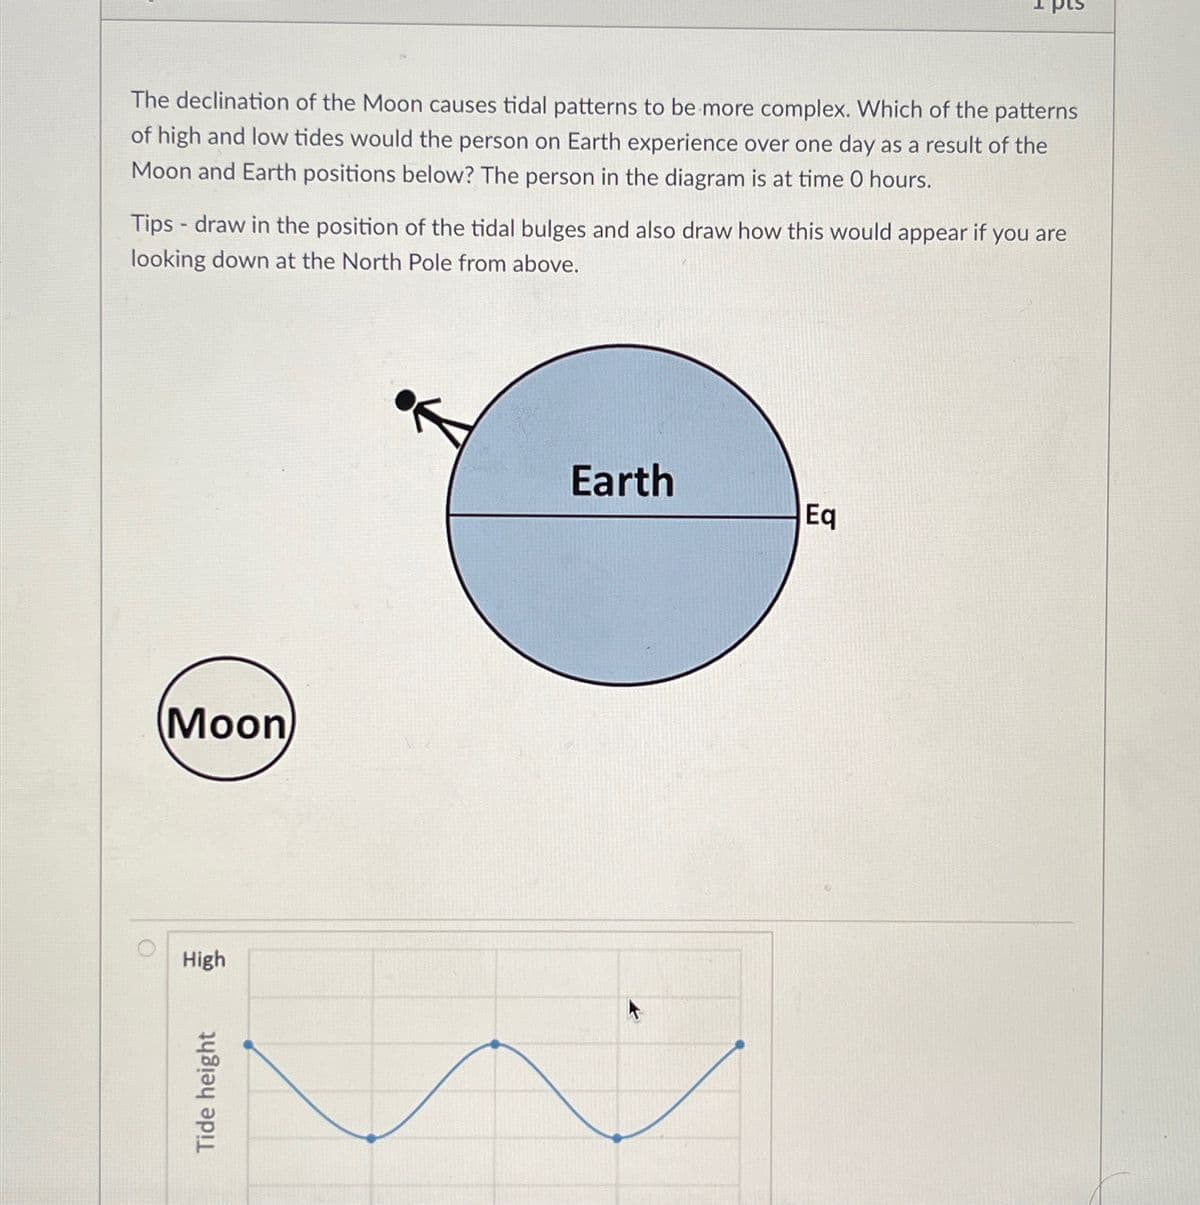 The declination of the Moon causes tidal patterns to be more complex. Which of the patterns
of high and low tides would the person on Earth experience over one day as a result of the
Moon and Earth positions below? The person in the diagram is at time 0 hours.
Tips - draw in the position of the tidal bulges and also draw how this would appear if you are
looking down at the North Pole from above.
Moon
High
Tide height
Earth
Eq